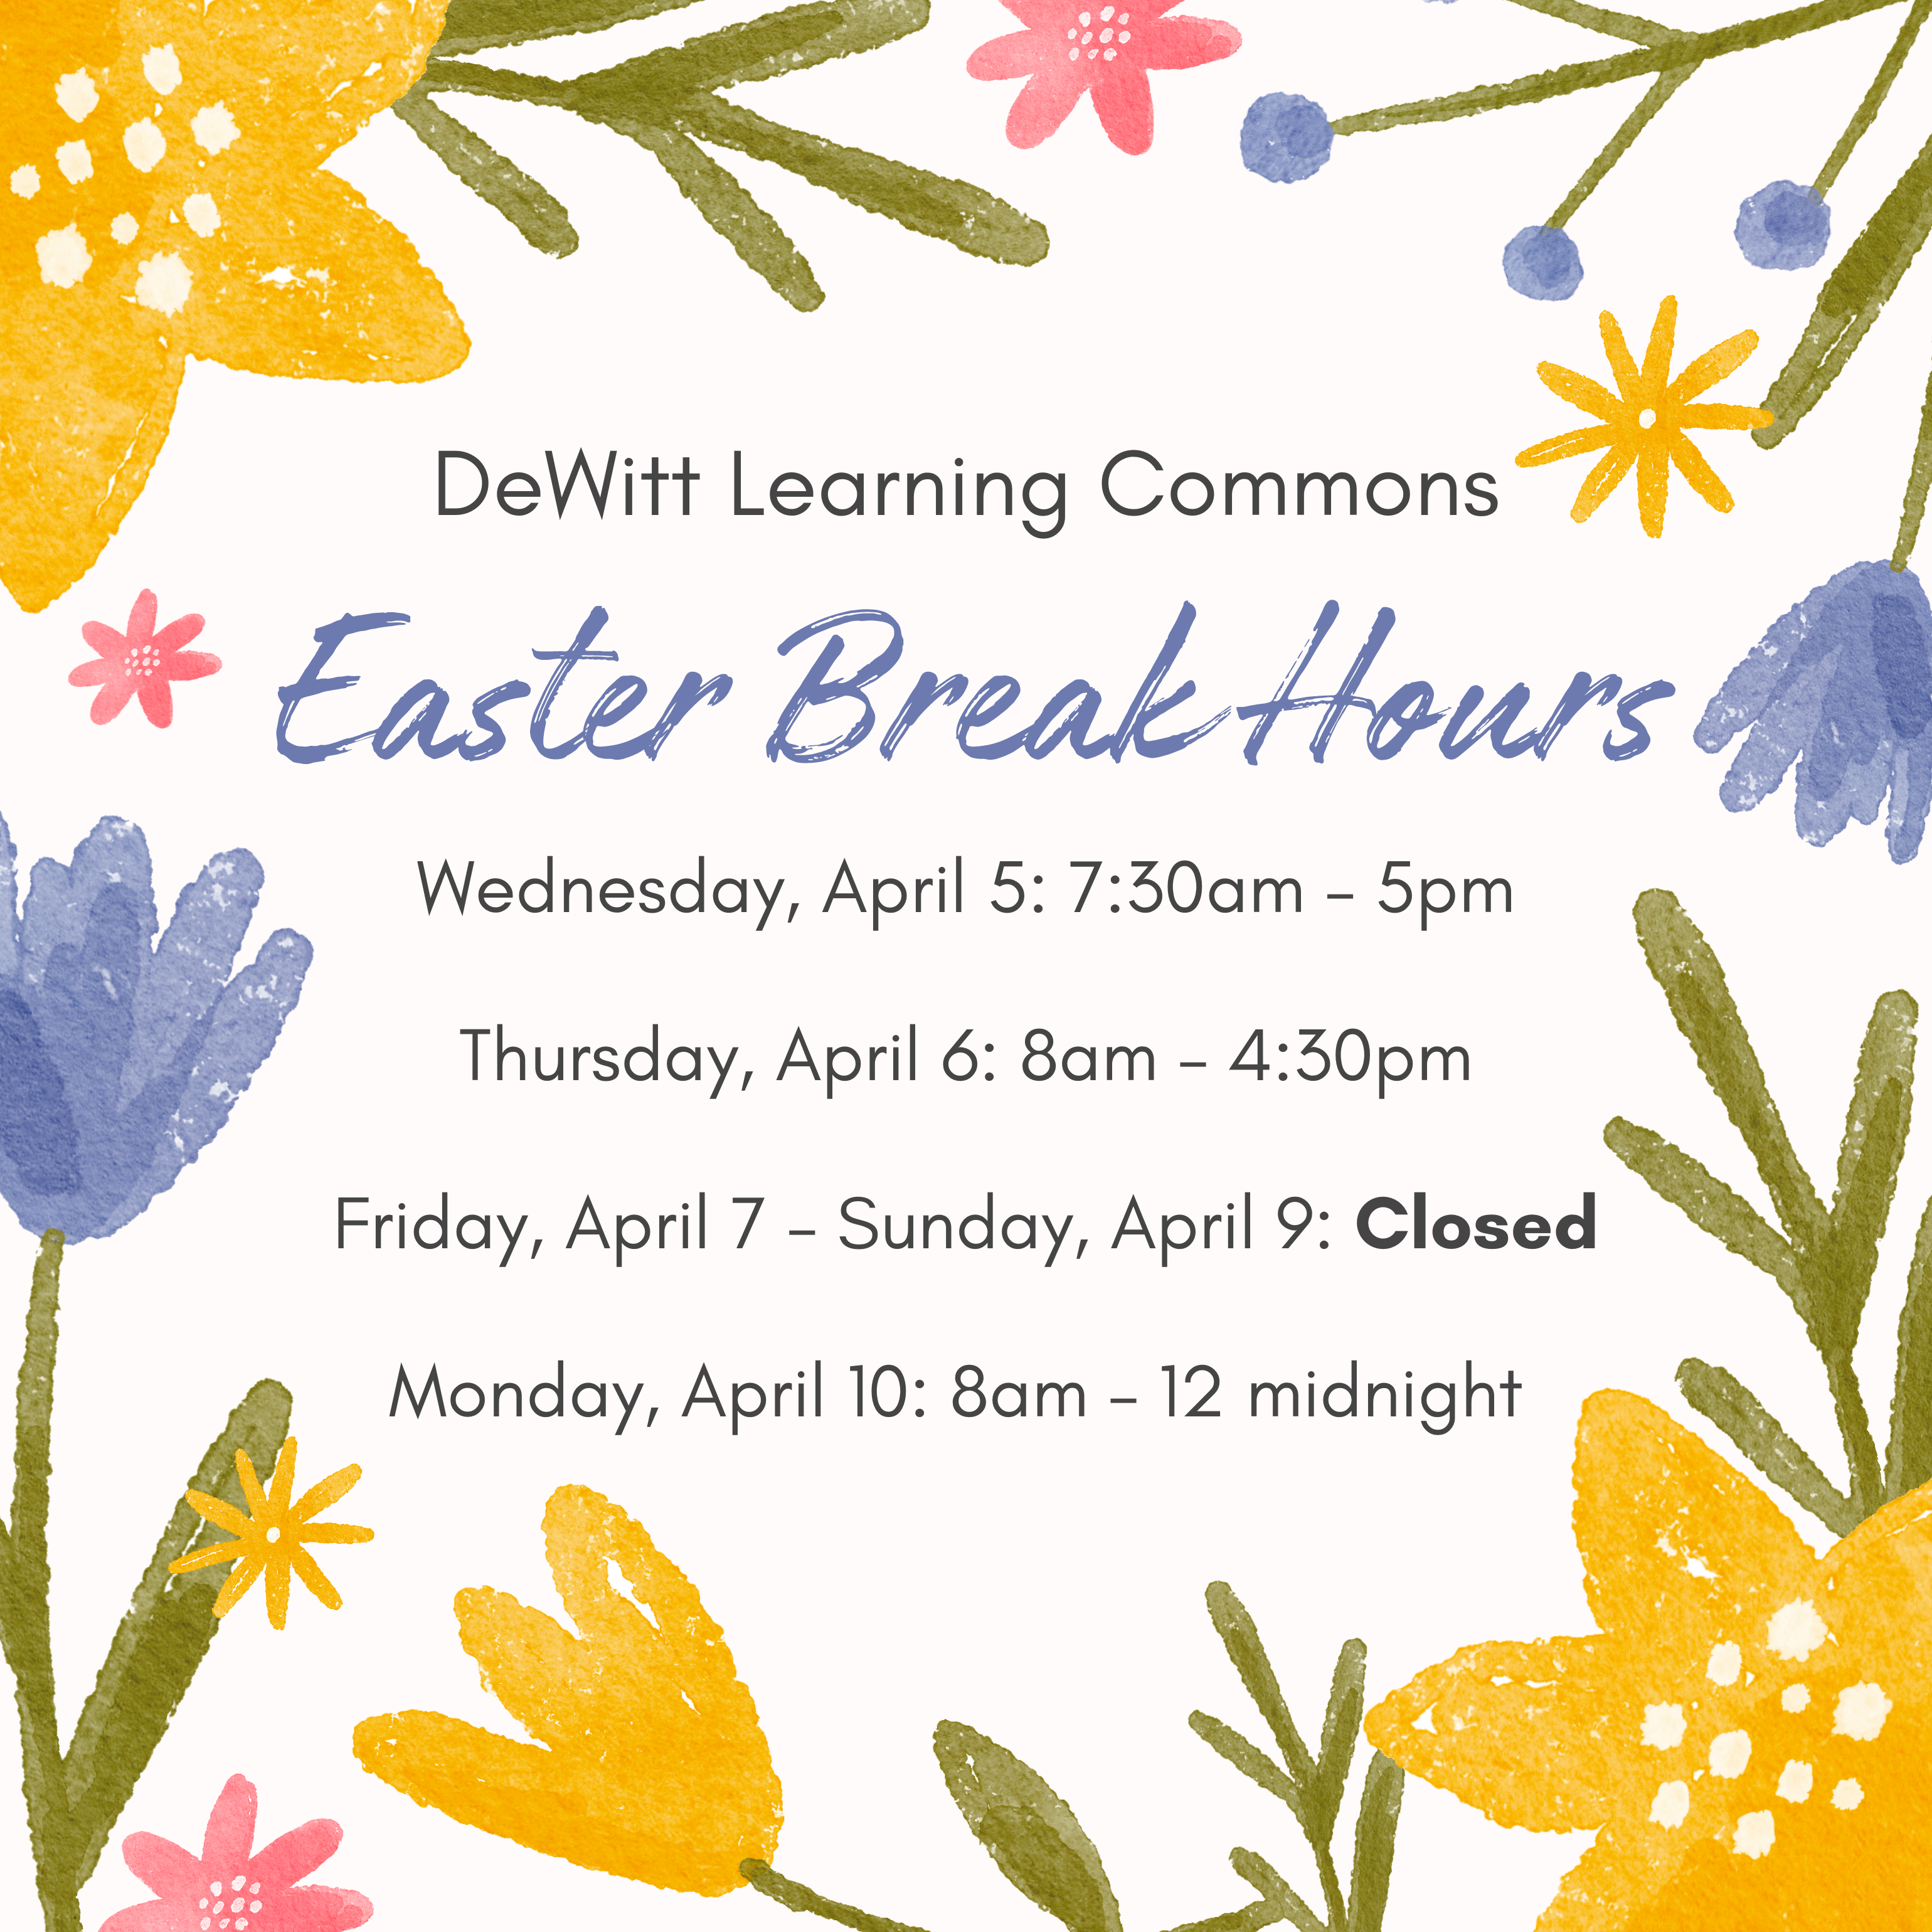 DeWitt Learning Commons Easter Break Hours: Wednesday, April 5: 7:30am – 5pm; Thursday, April 6: 8am – 4:30pm; Friday, April 7 – Sunday, April 9: Closed; Monday, April 10: 8am – 12 midnight.